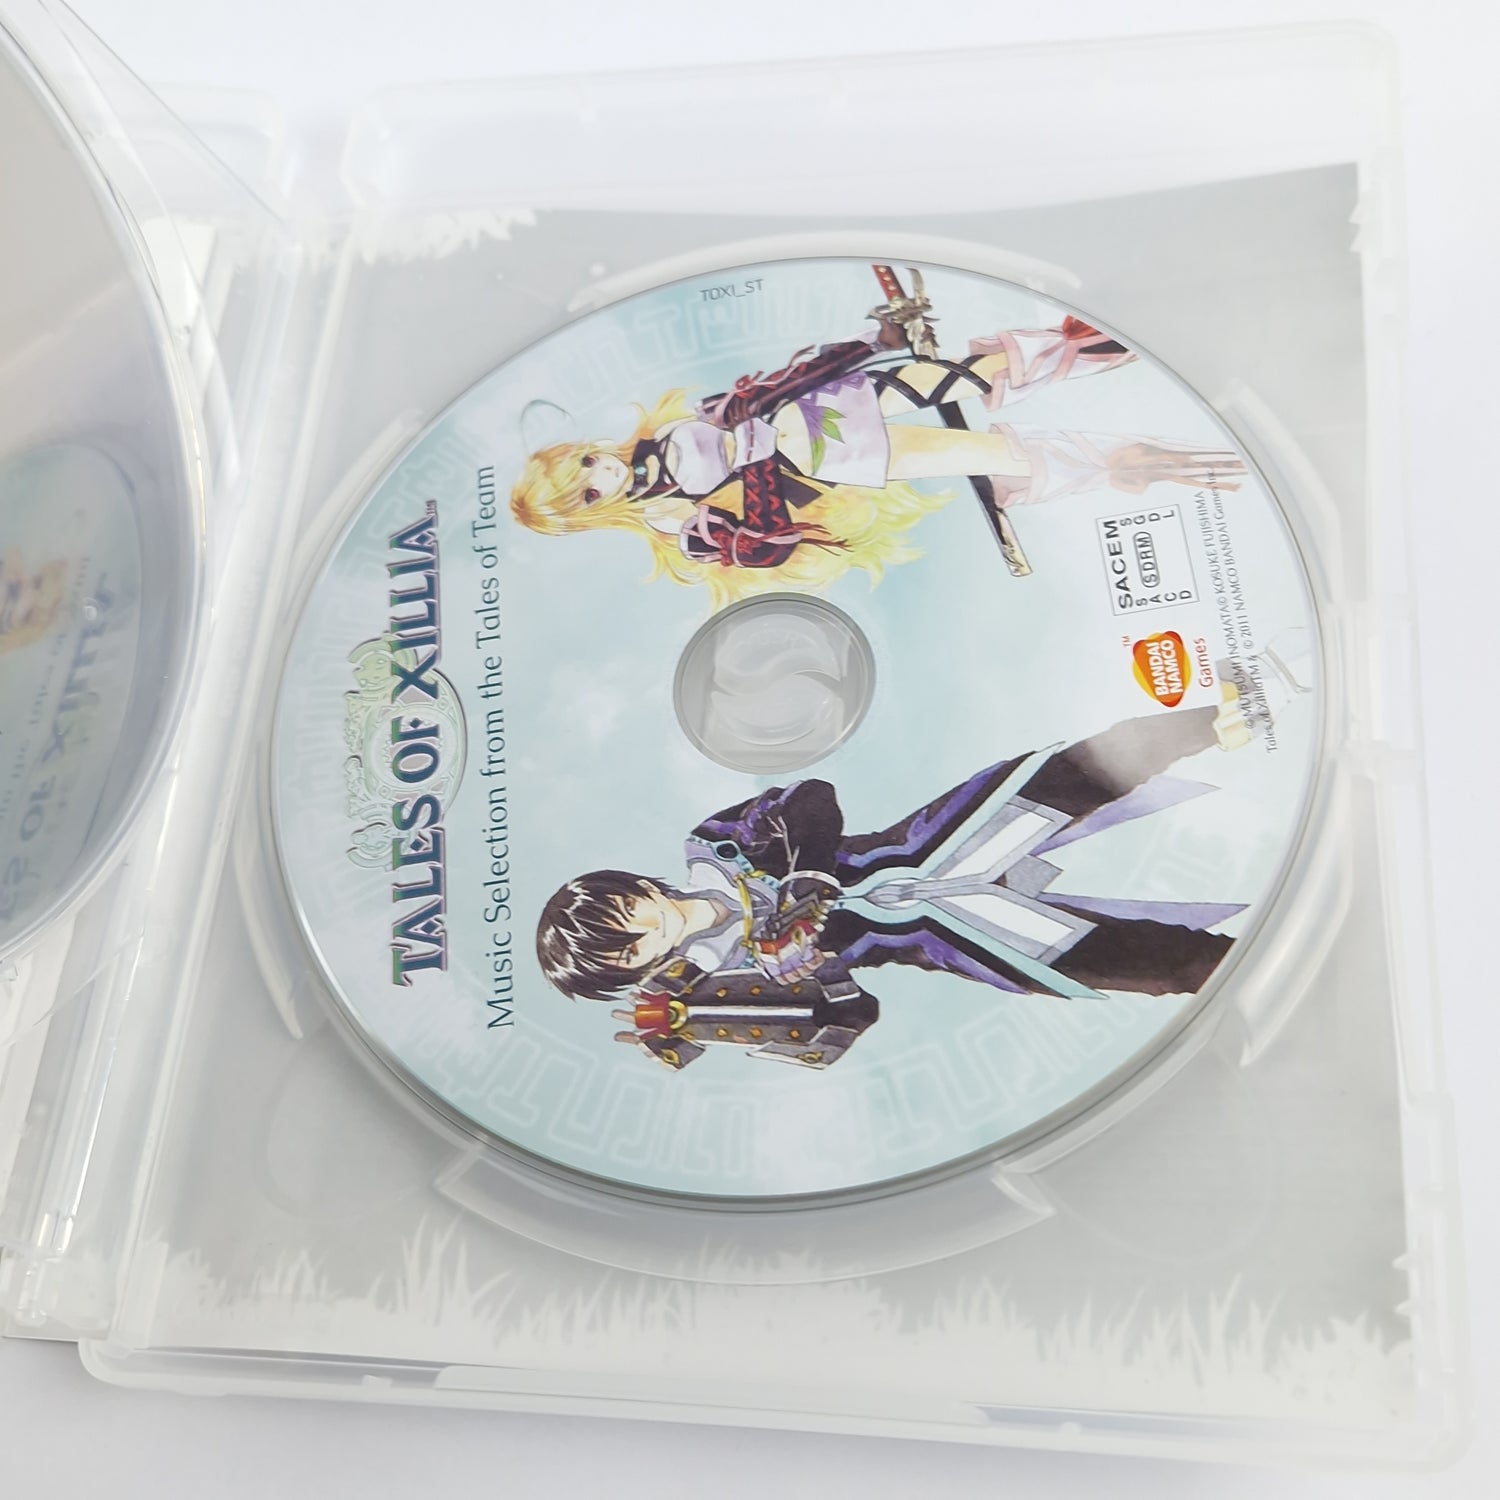 Playstation 3 game: Tales of Xillia Day One Edition - OVP instructions Sony PS3